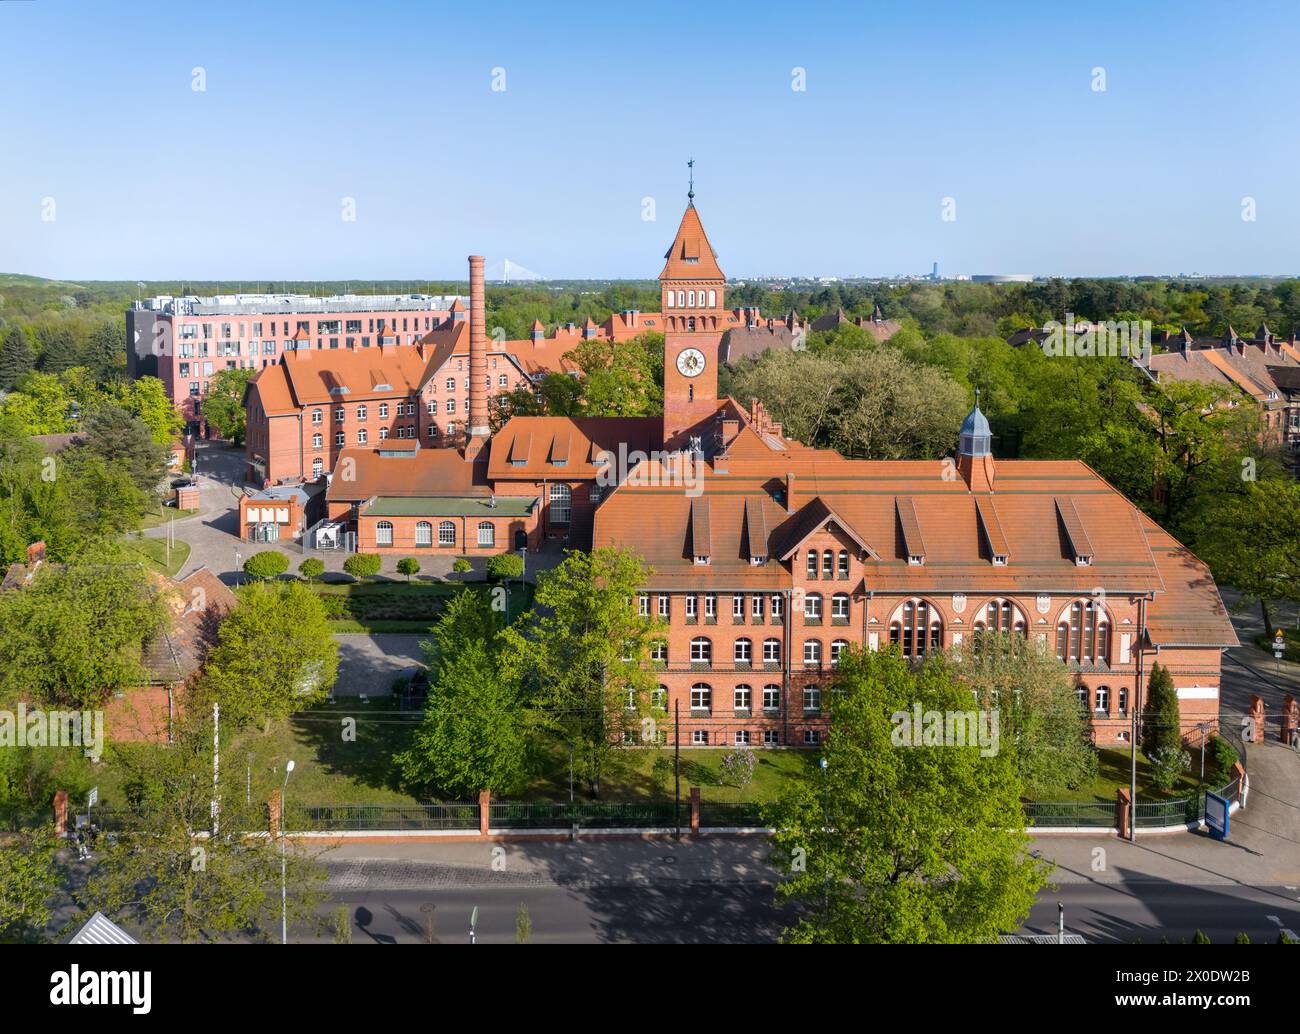 Wroclaw, Poland. Aerial view of Pracze Odrzanskie historic district with red brick buildings built in 1899-1913 Stock Photo